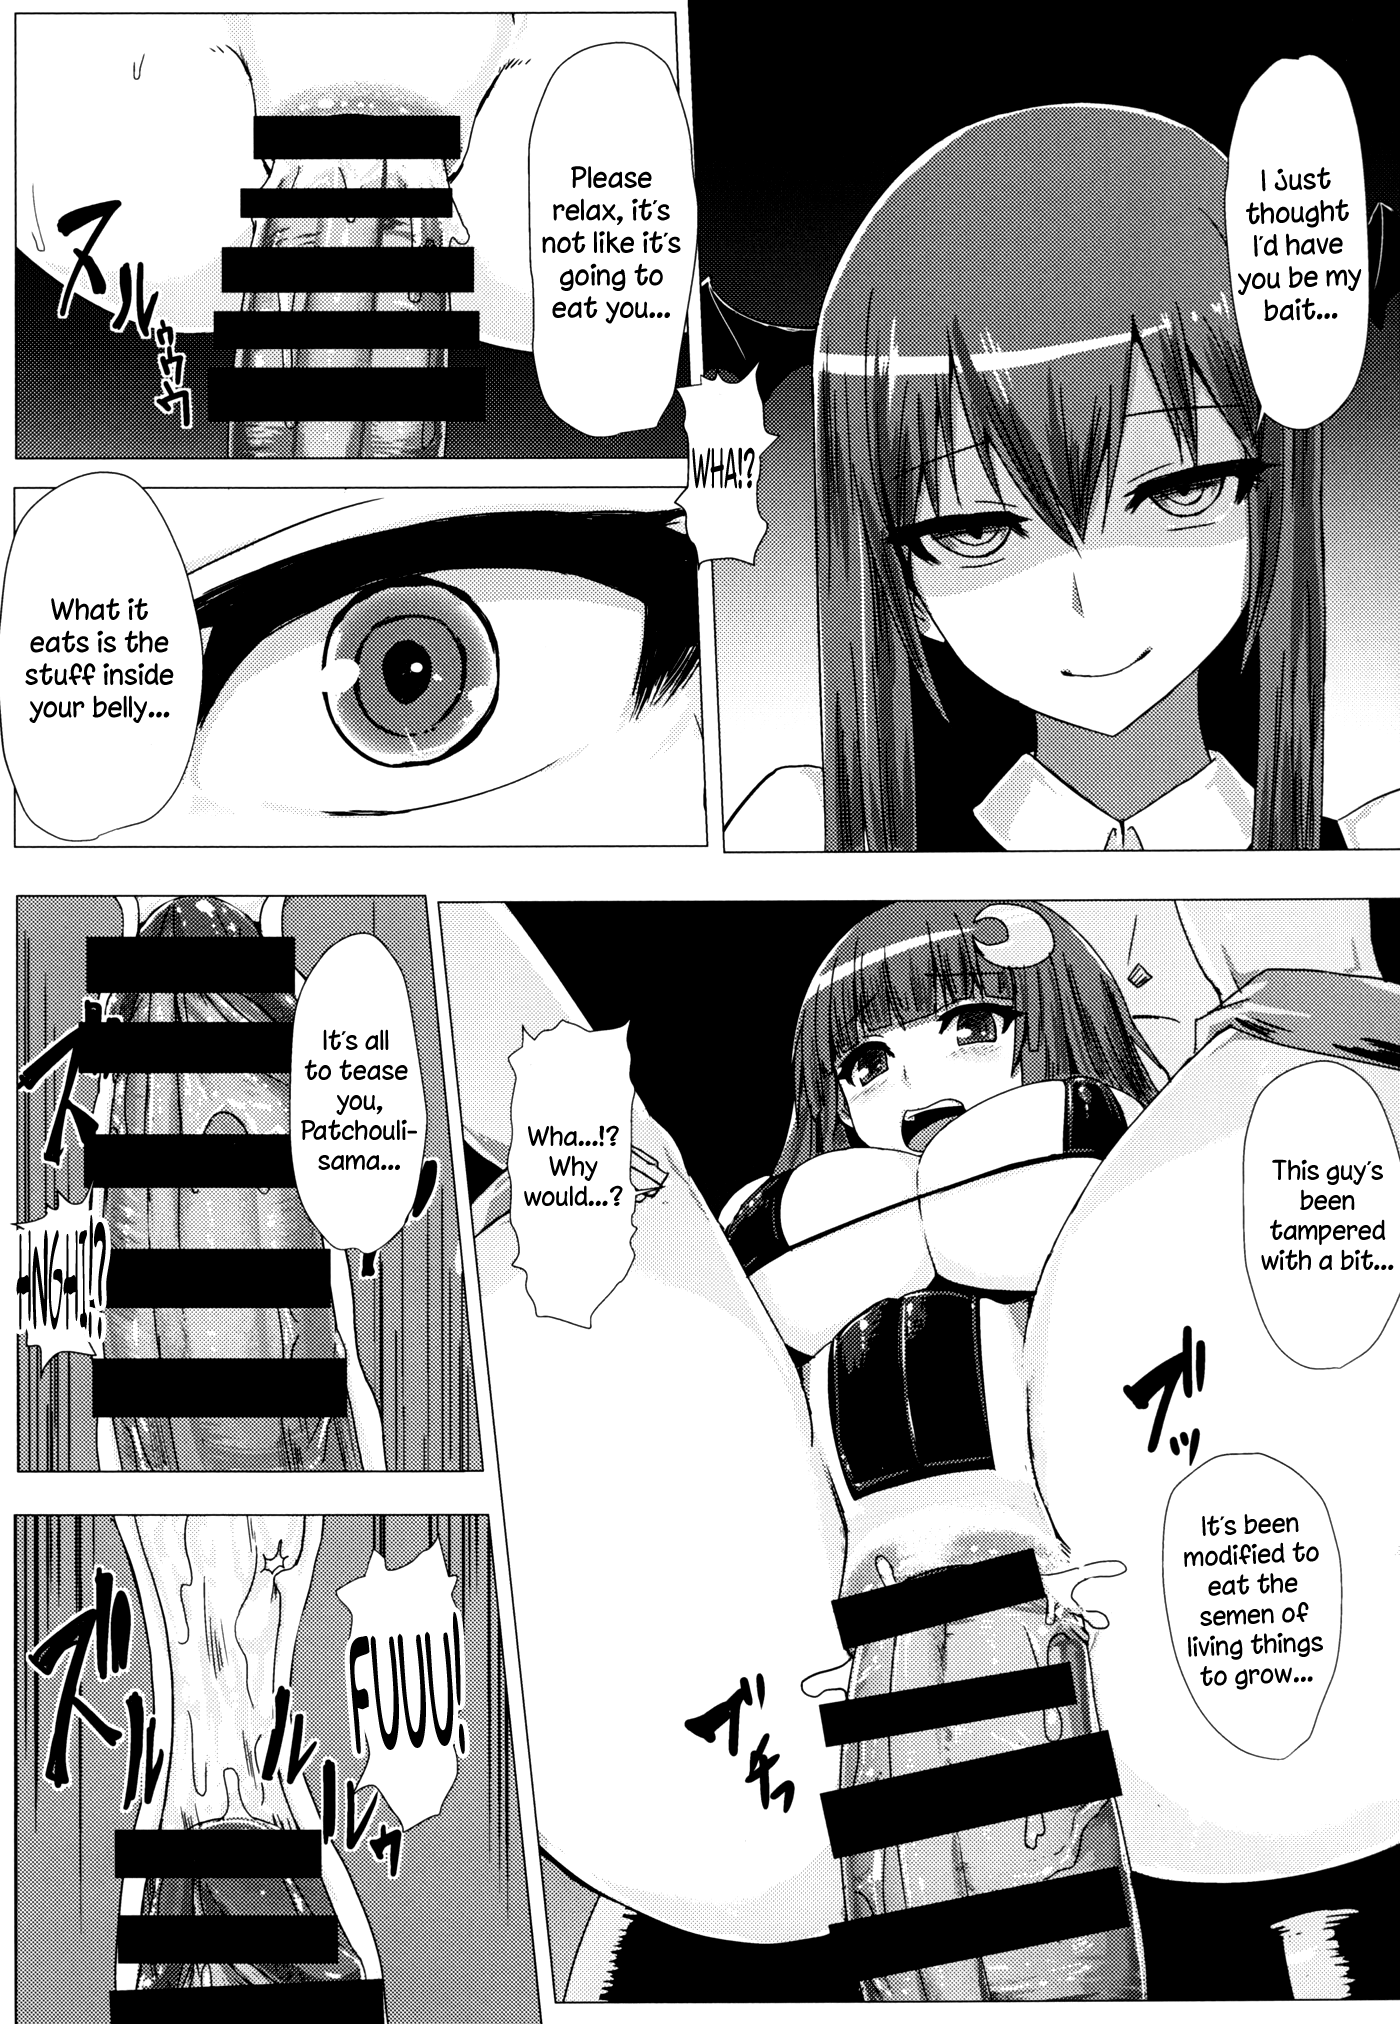 Ass Patchy Patchy hentai manga picture 10